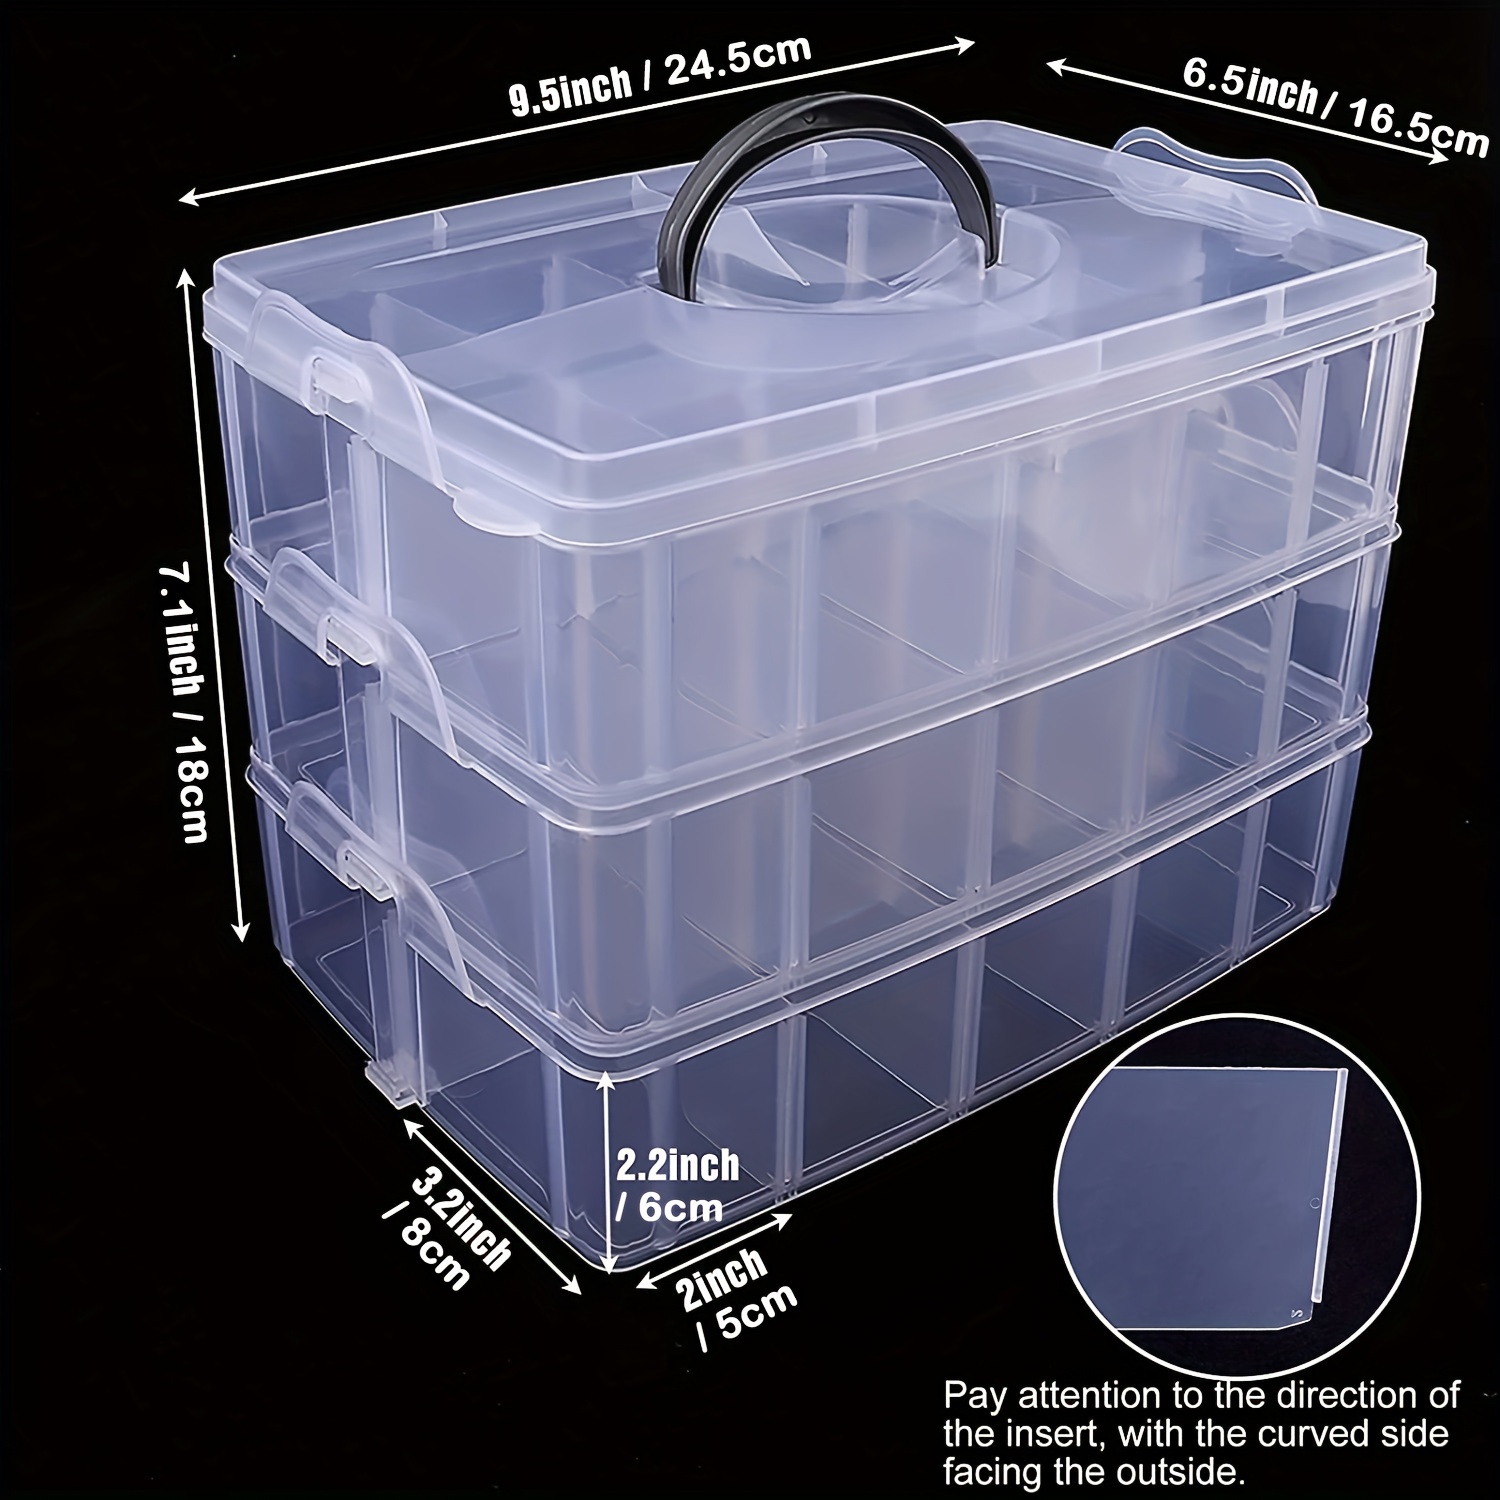  3-Tier Plastic Craft Storage Containers with 30 Compartments,  40 Sticker Labels (9.5 x 6.5 x 7.2 Inch)